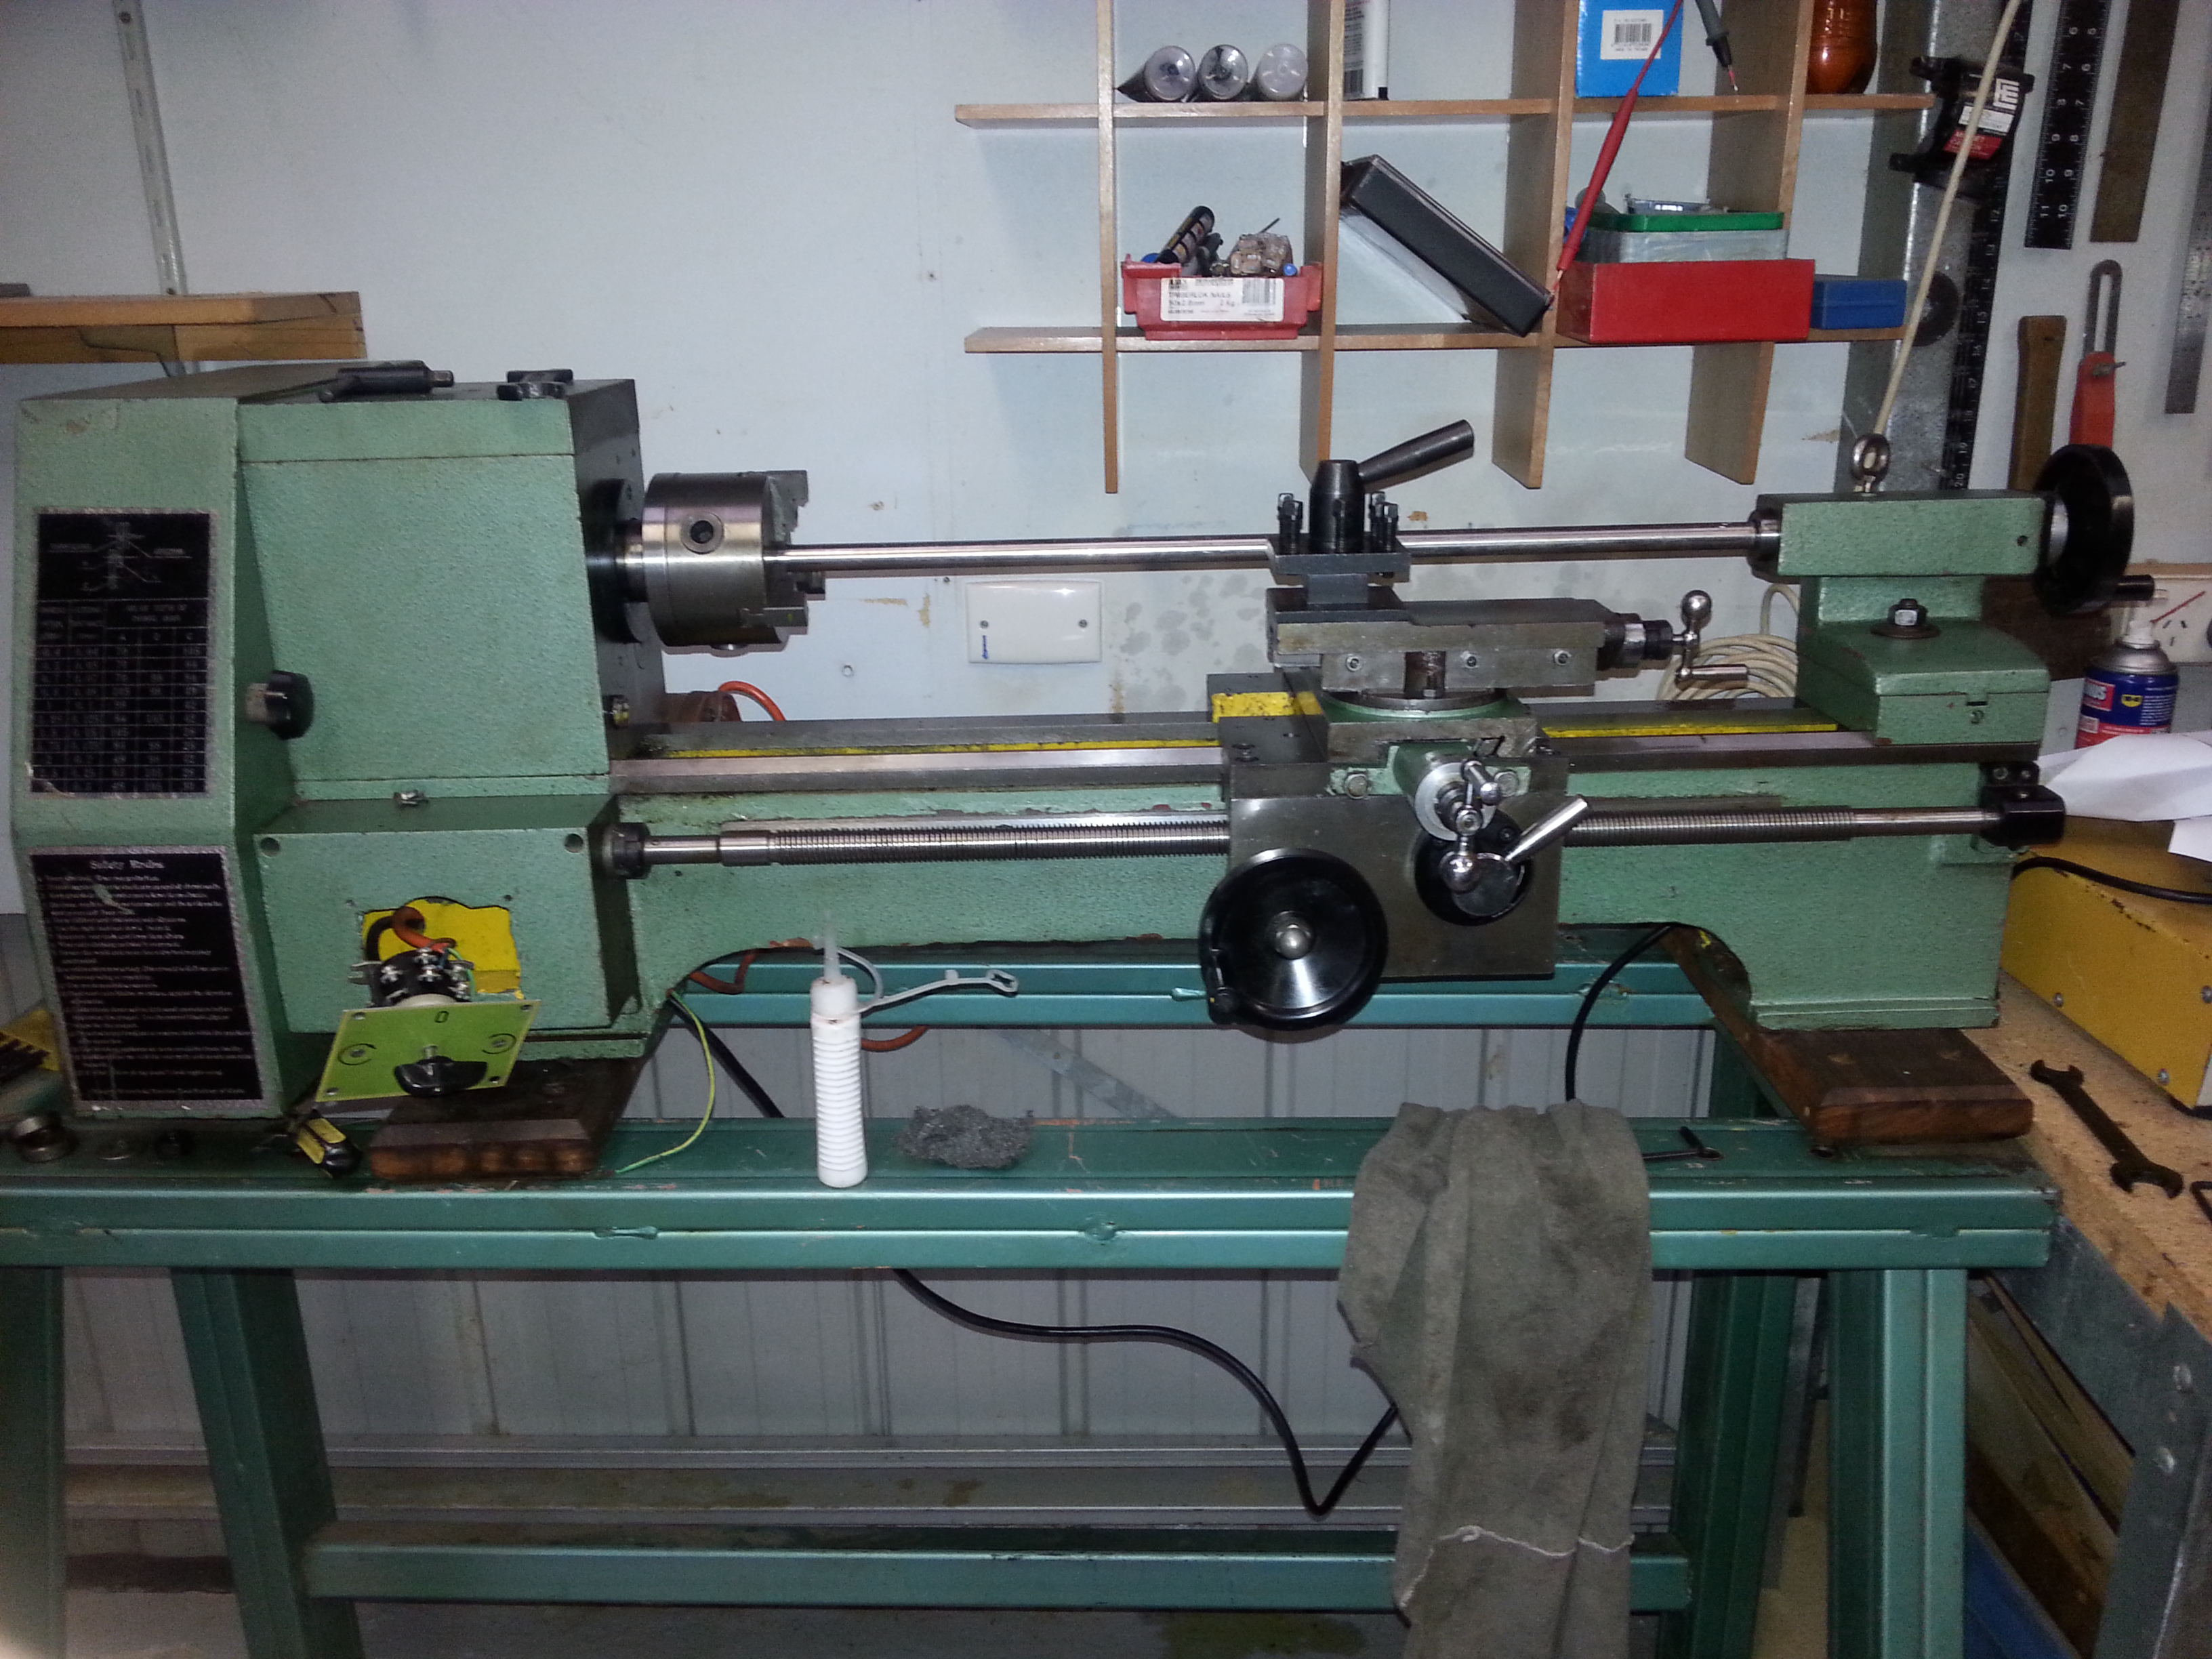 Lathe as first acquired